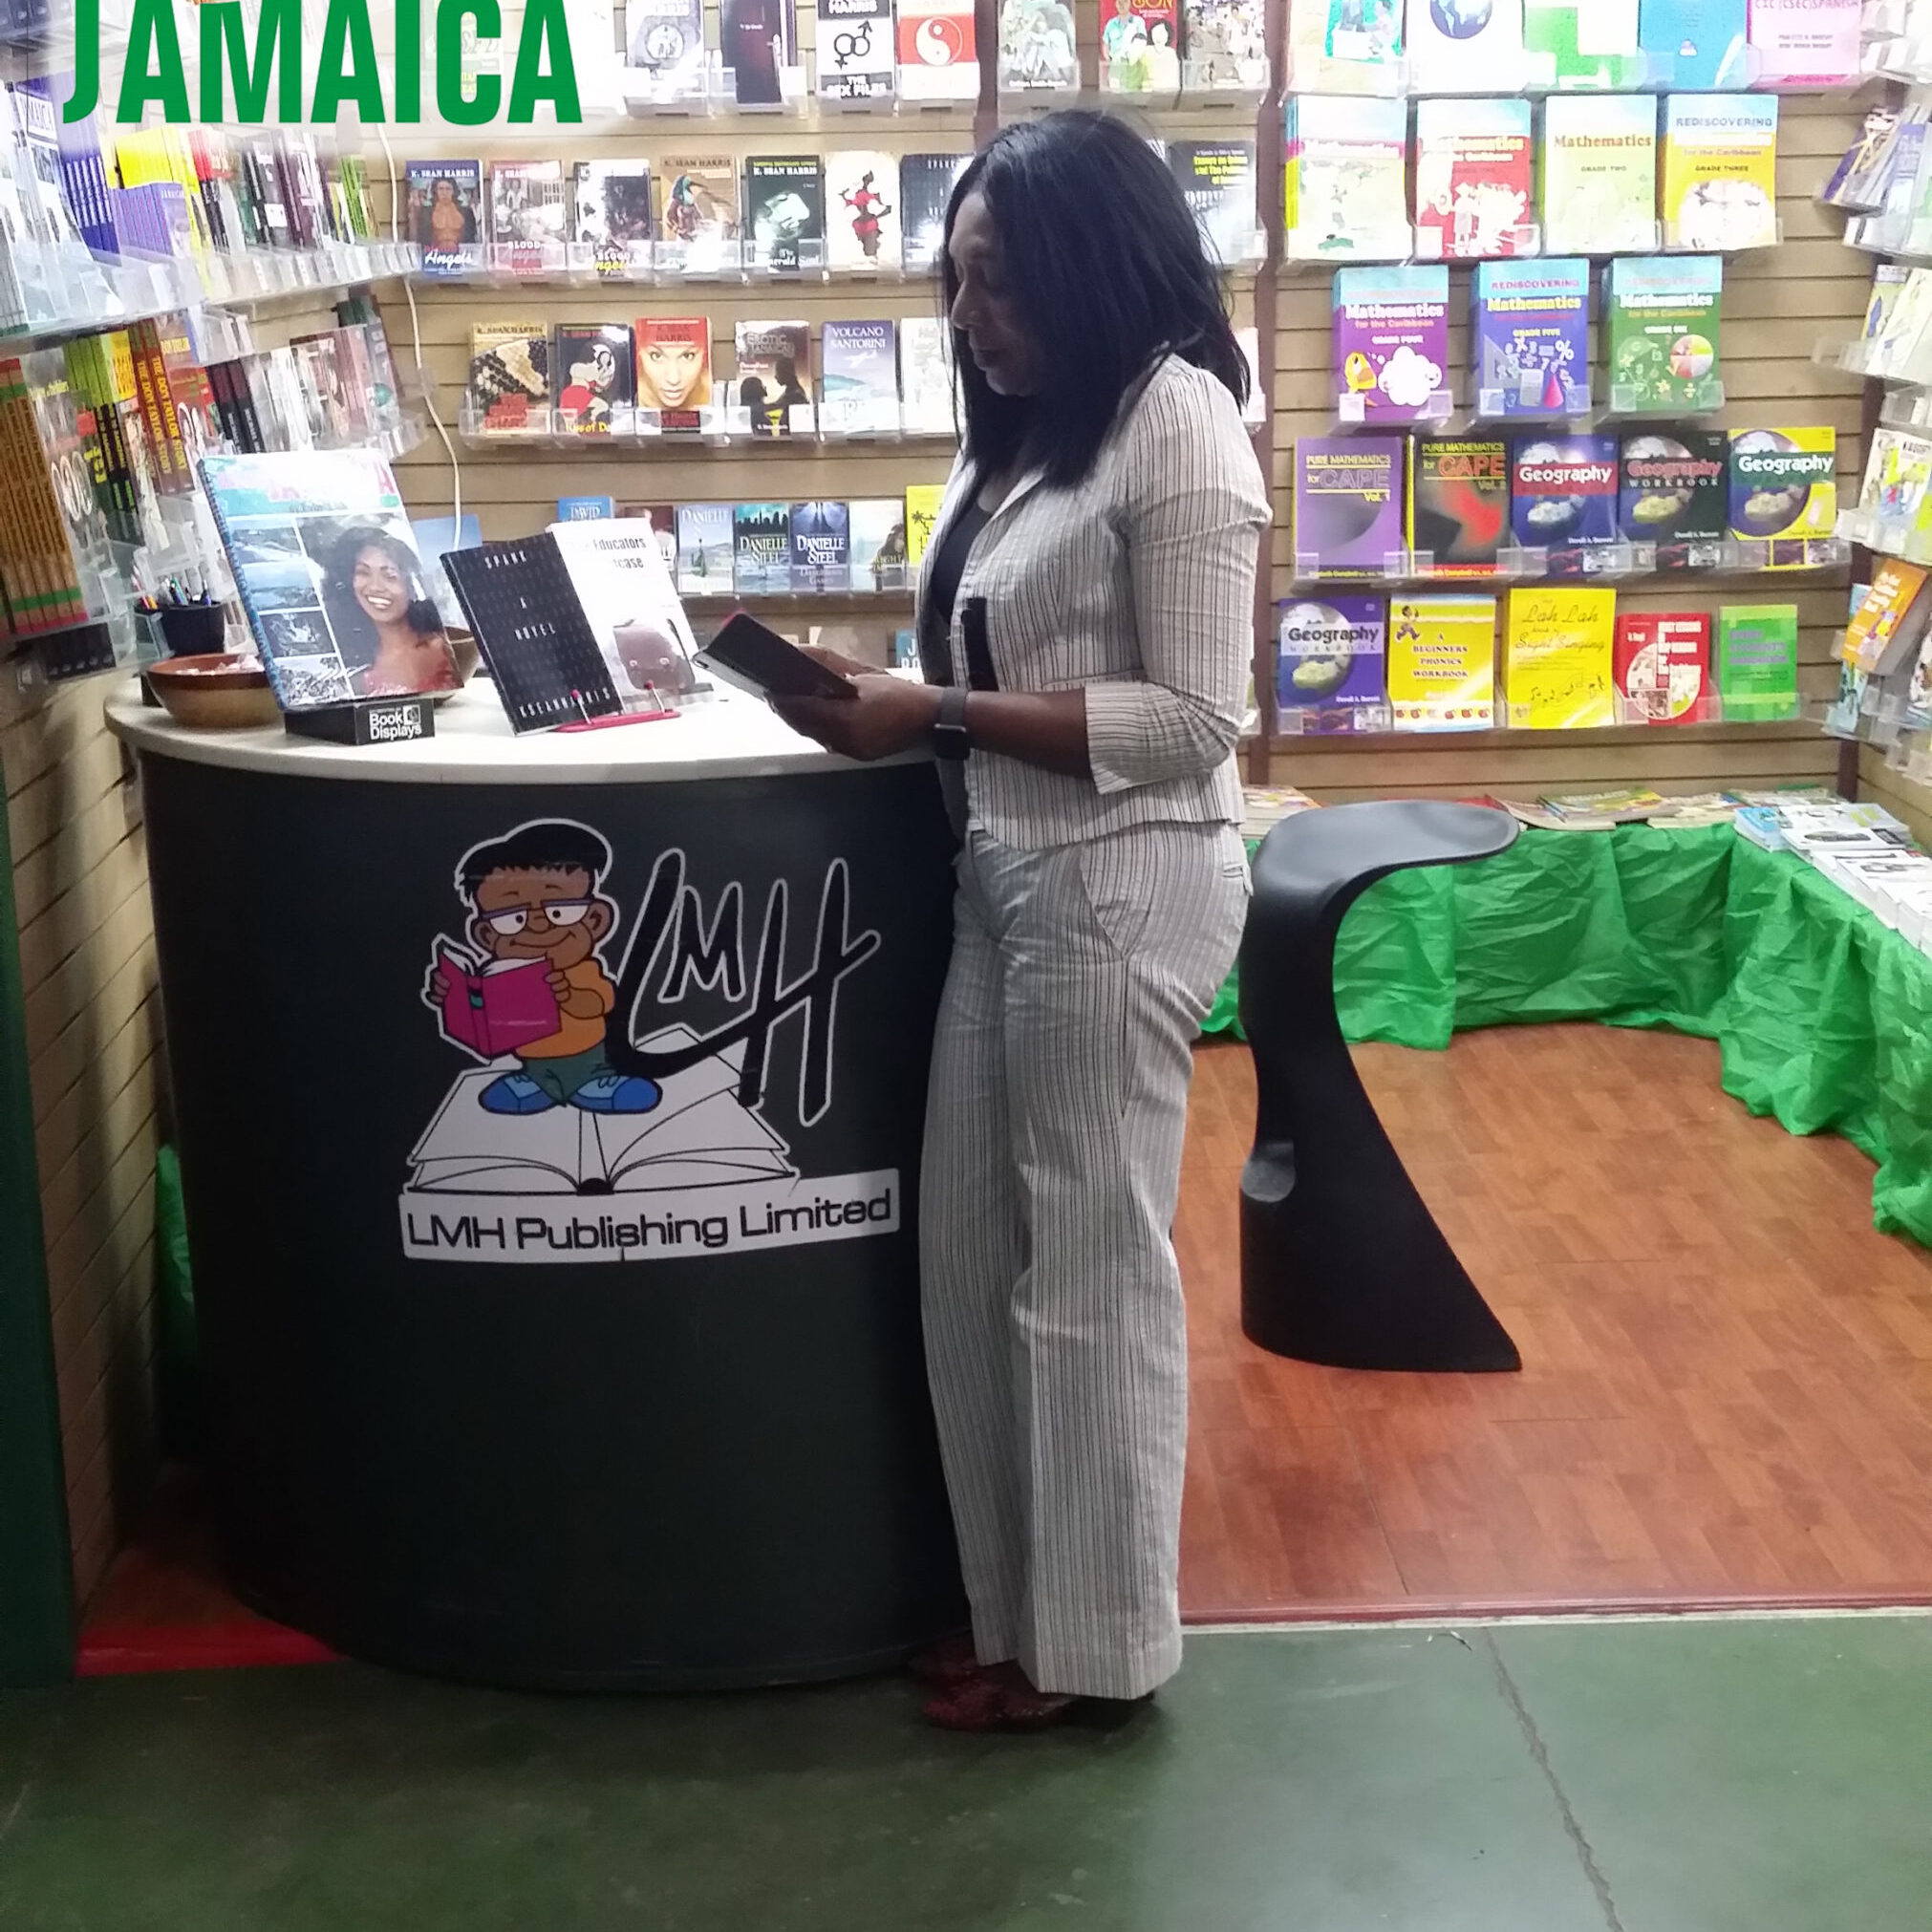 Our CEO at Expo Jamaica 2018